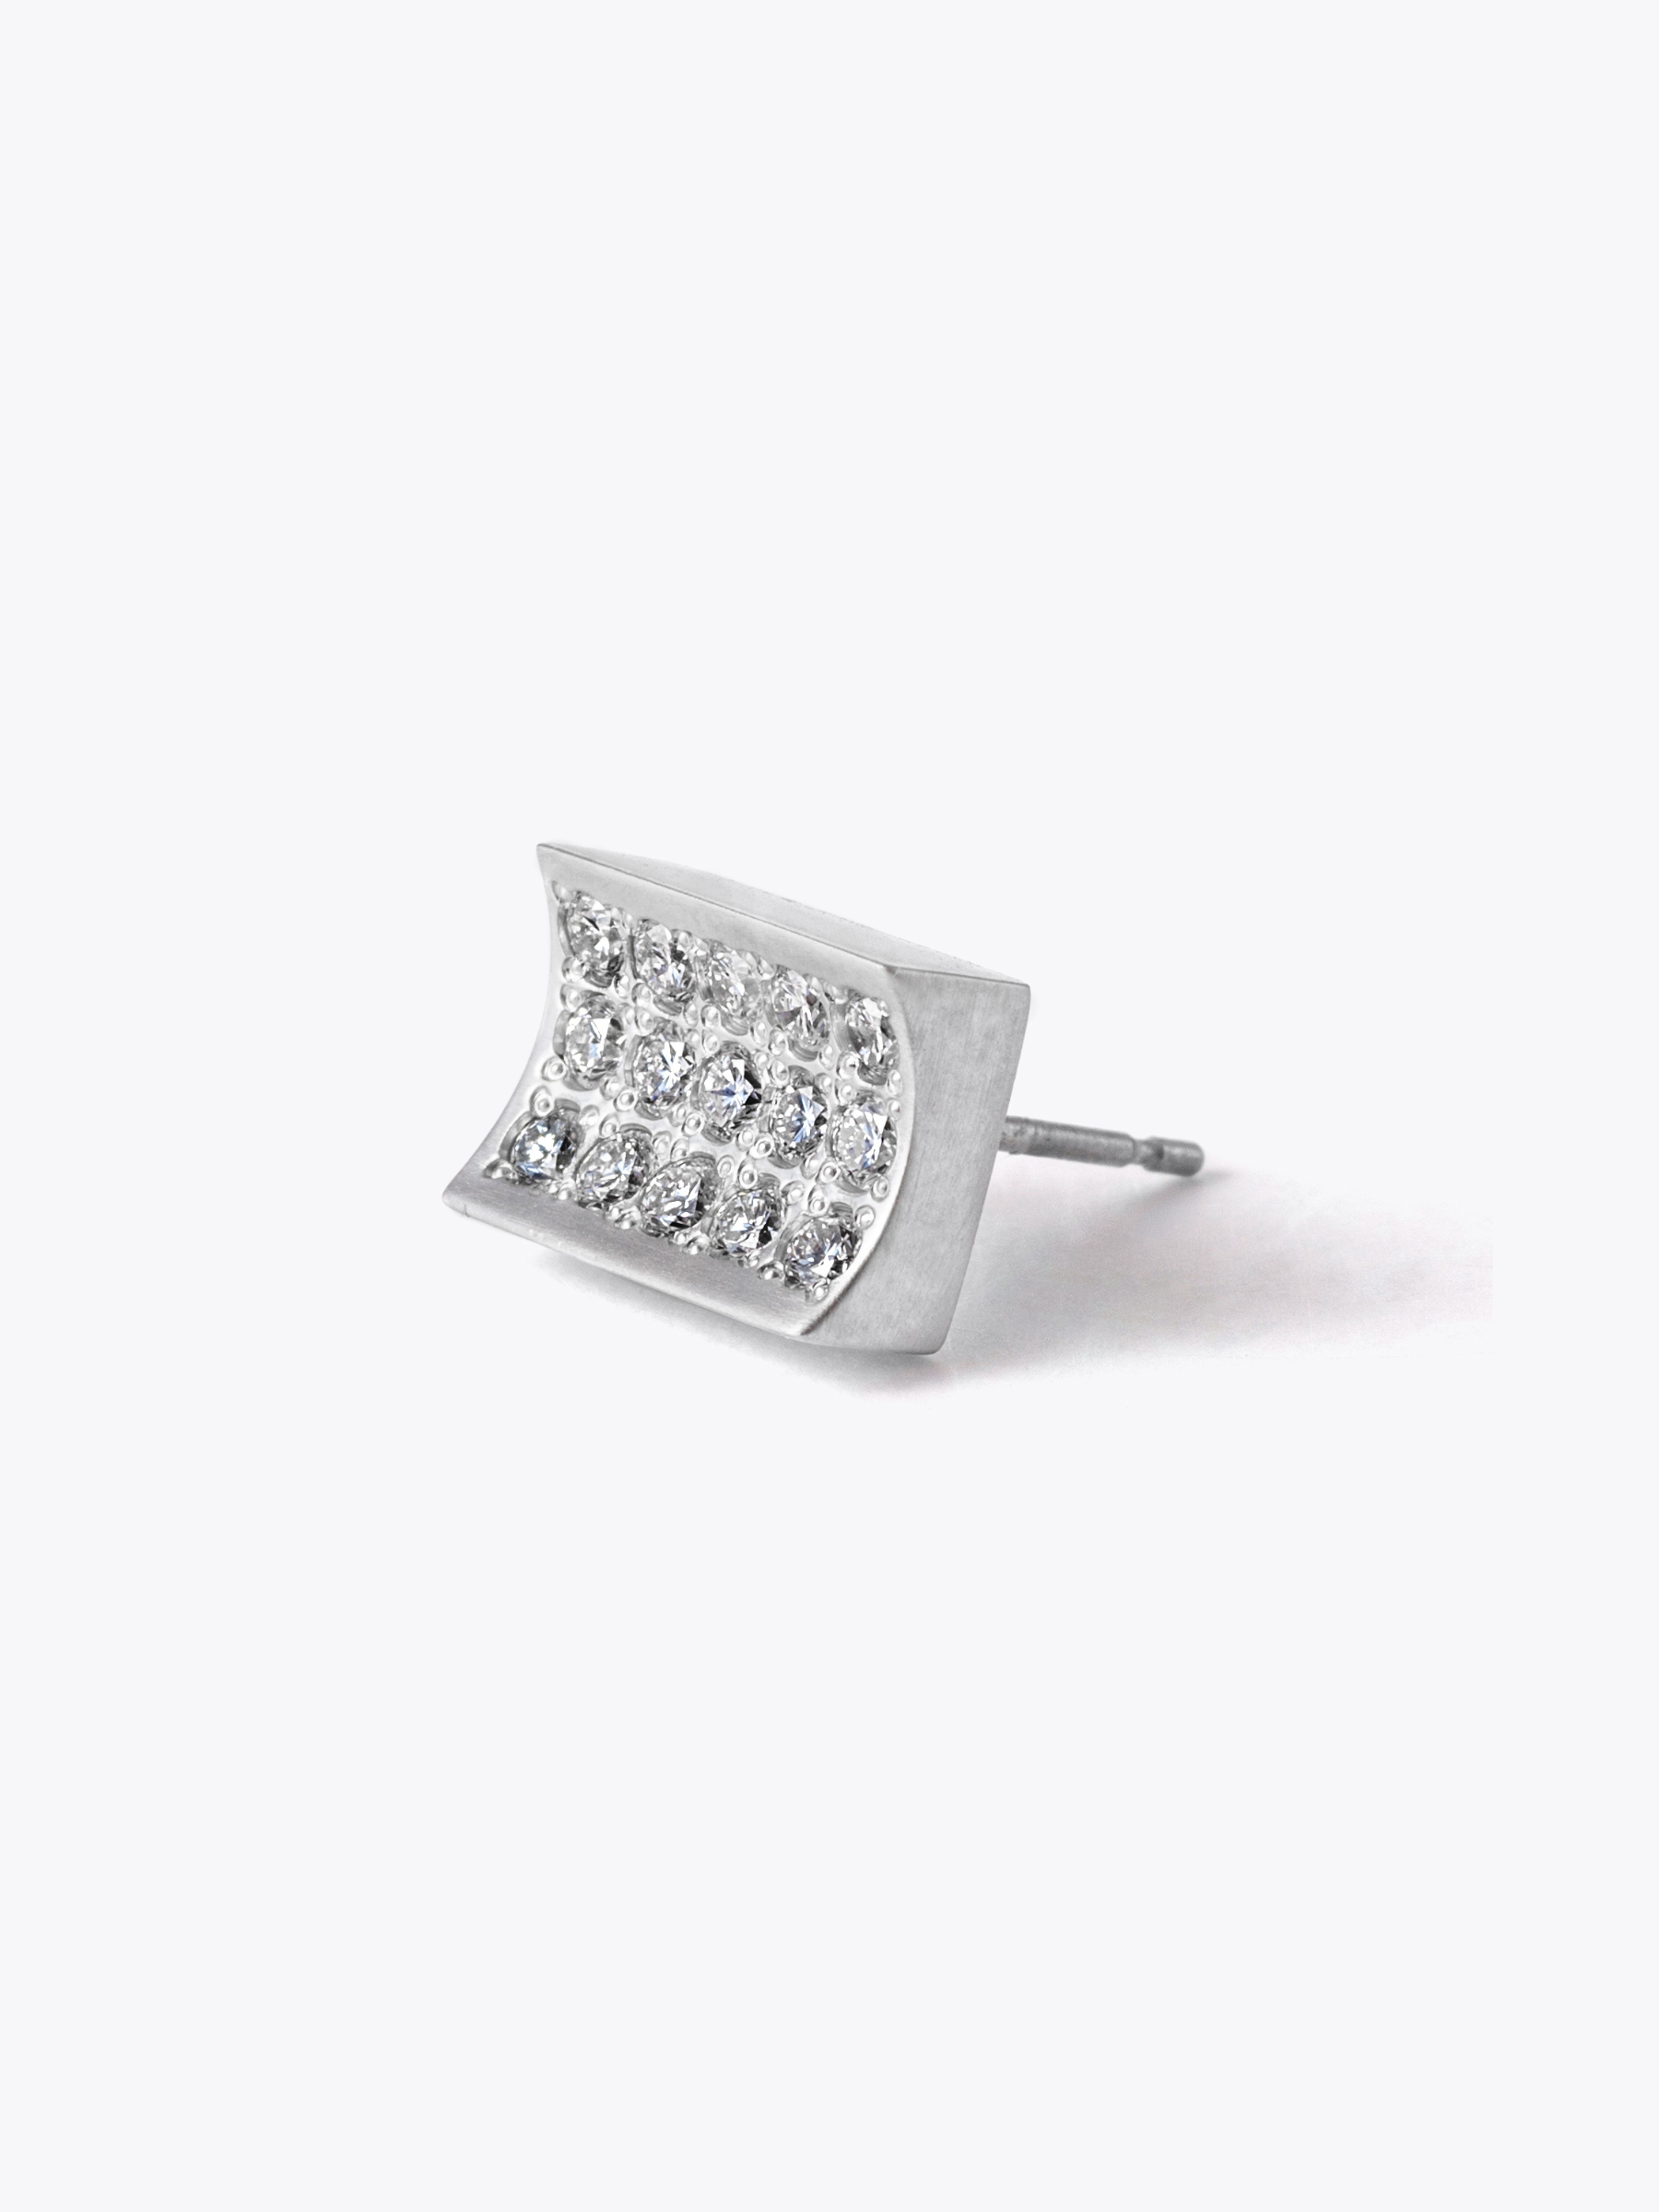 [Successeure] Reshine scratch earrings 30 labgrowndiamonds (pair) Quick Delivery